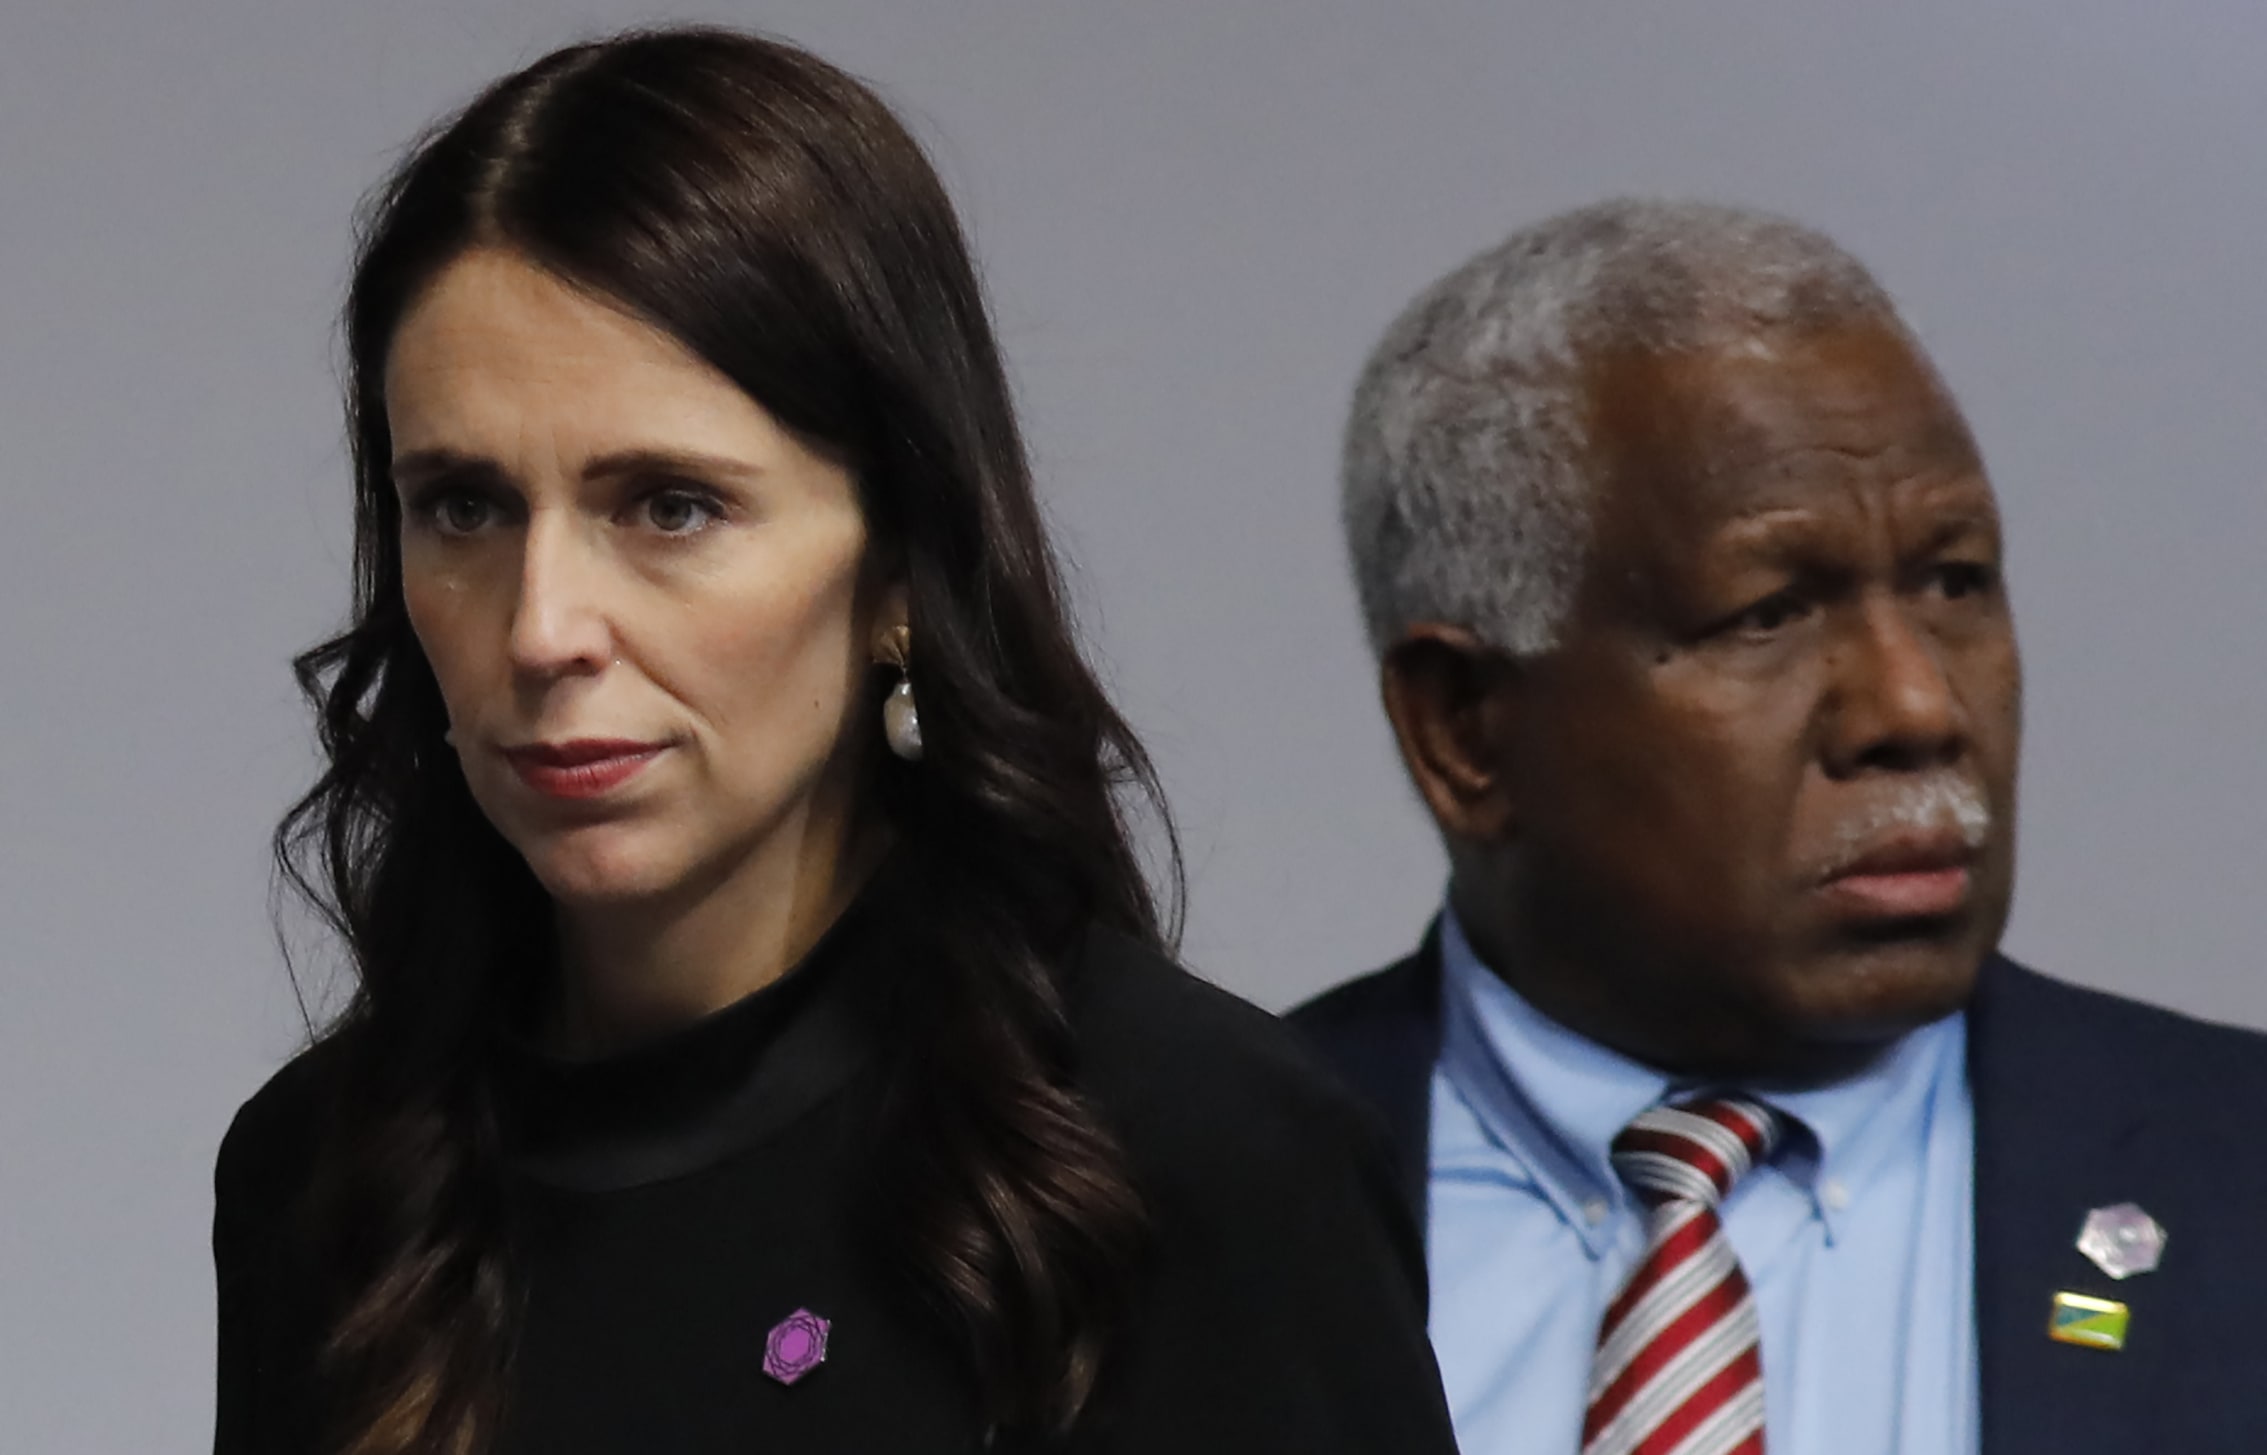 New Zealand Prime Minister Jacinda Ardern and Solomon Islands Prime Minister Manasseh Sogavare attend the executive session of the Commonwealth Heads of Government Meeting, at Lanacaster House in London on 19 April, 2018.